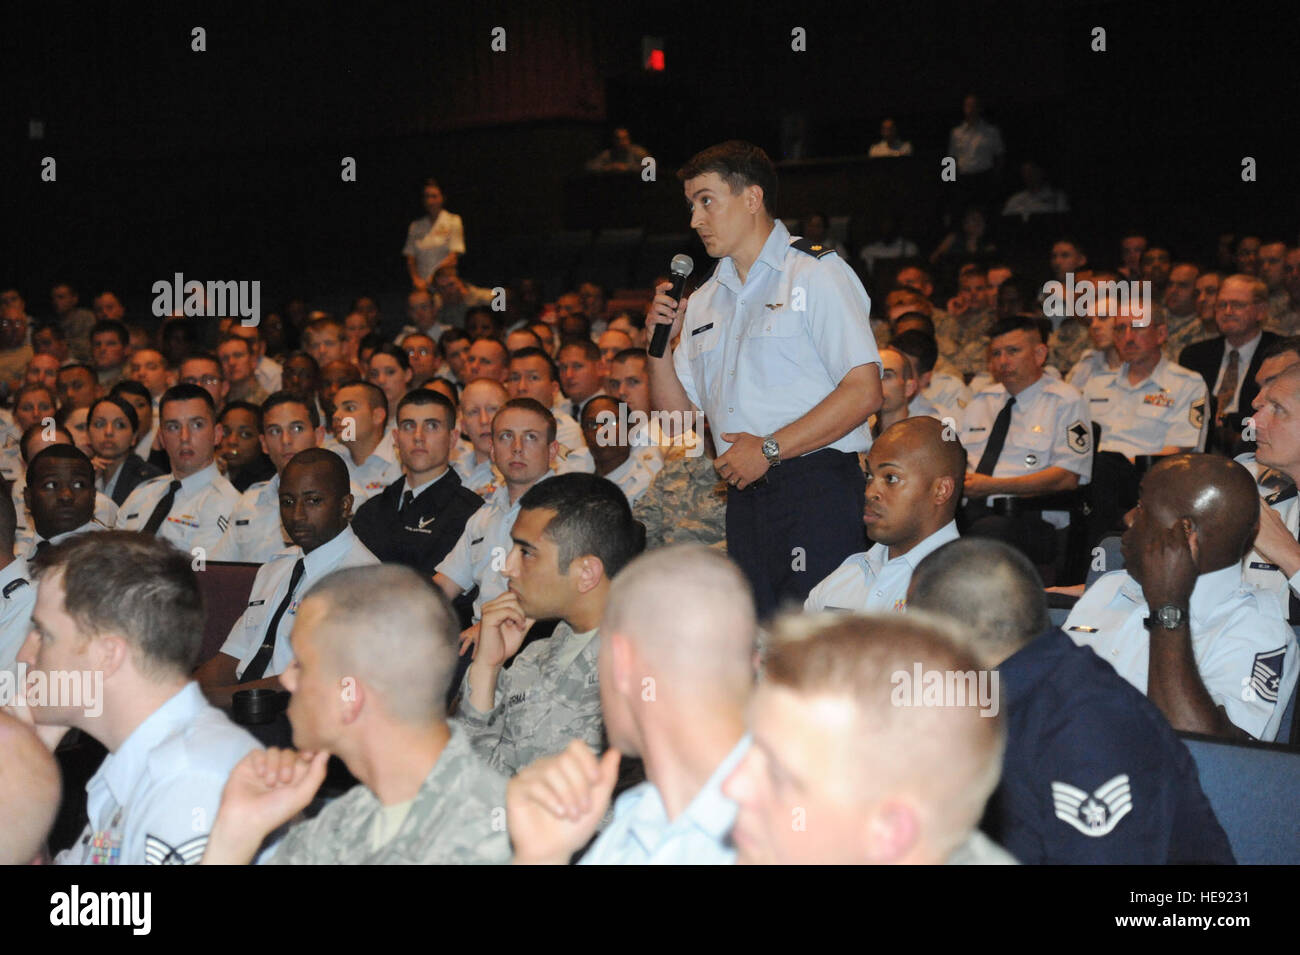 U.S. Air Force Maj. George Kotti, standing, with the 81st Medical Operations Squadron, poses a question to Gen. Edward Rice, not pictured, the commander of Air Education and Training Command (AETC), and Chief Master Sgt. Gerardo Tapia, not pictured, the command chief of AETC, during an all call in Welch Theater at Keesler Air Force Base, Miss., June 10, 2013.  Kemberly Groue Stock Photo